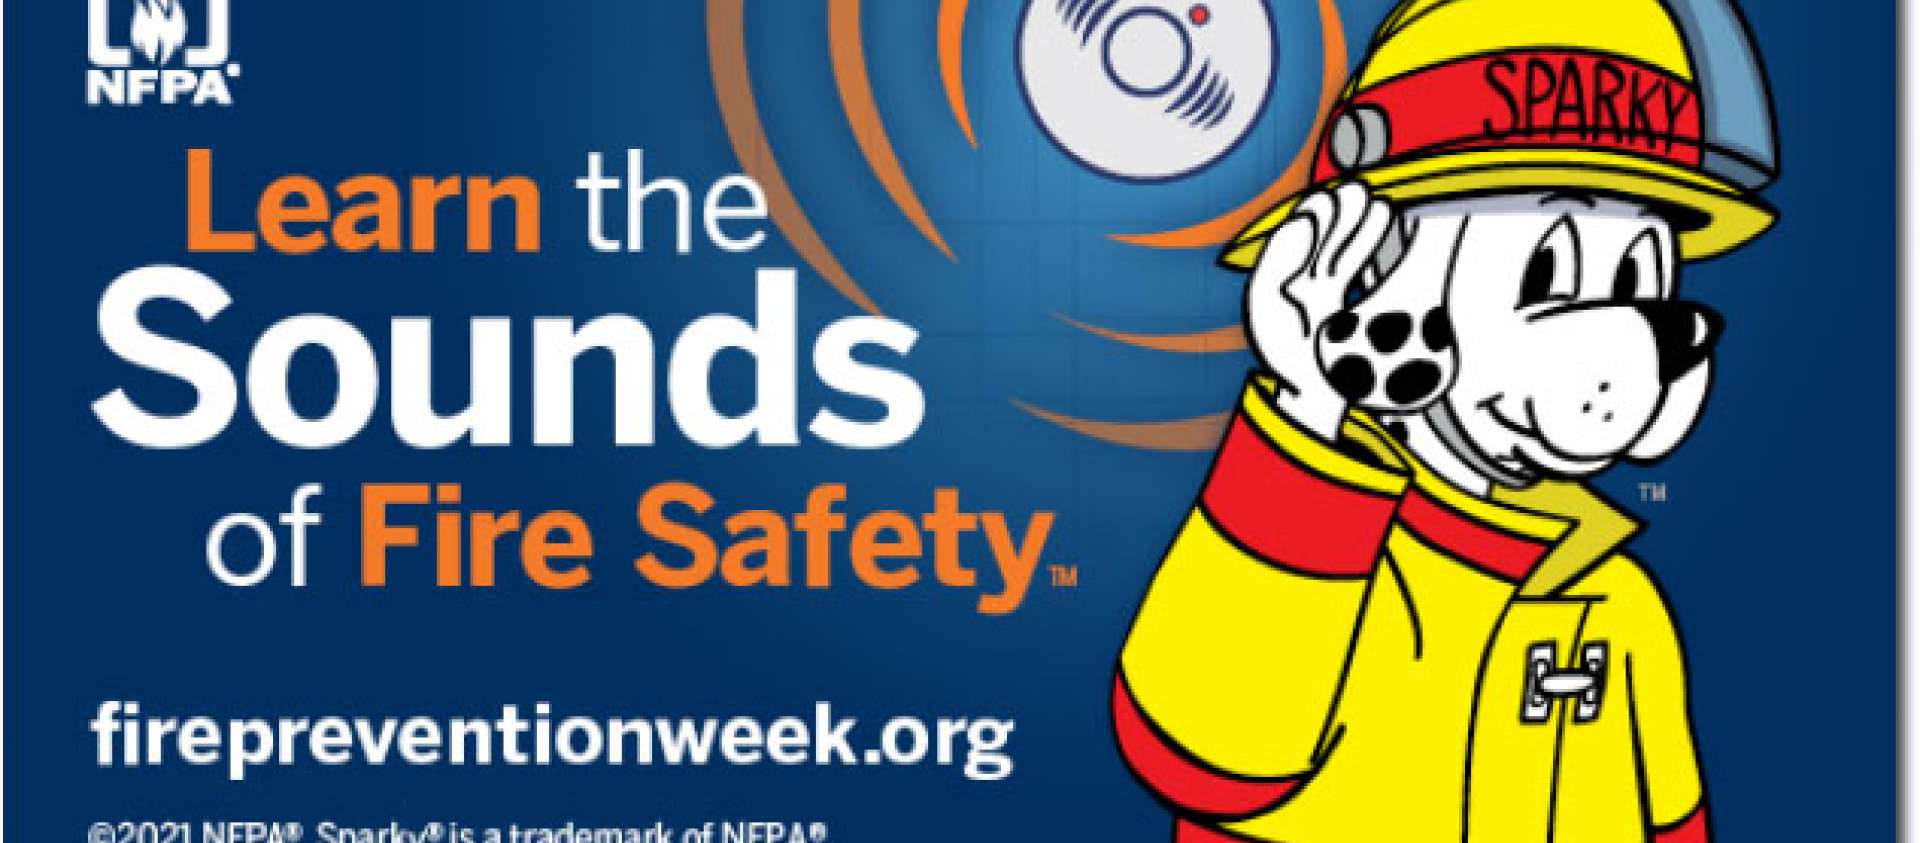 Learn the Sounds of Fire Safety Image